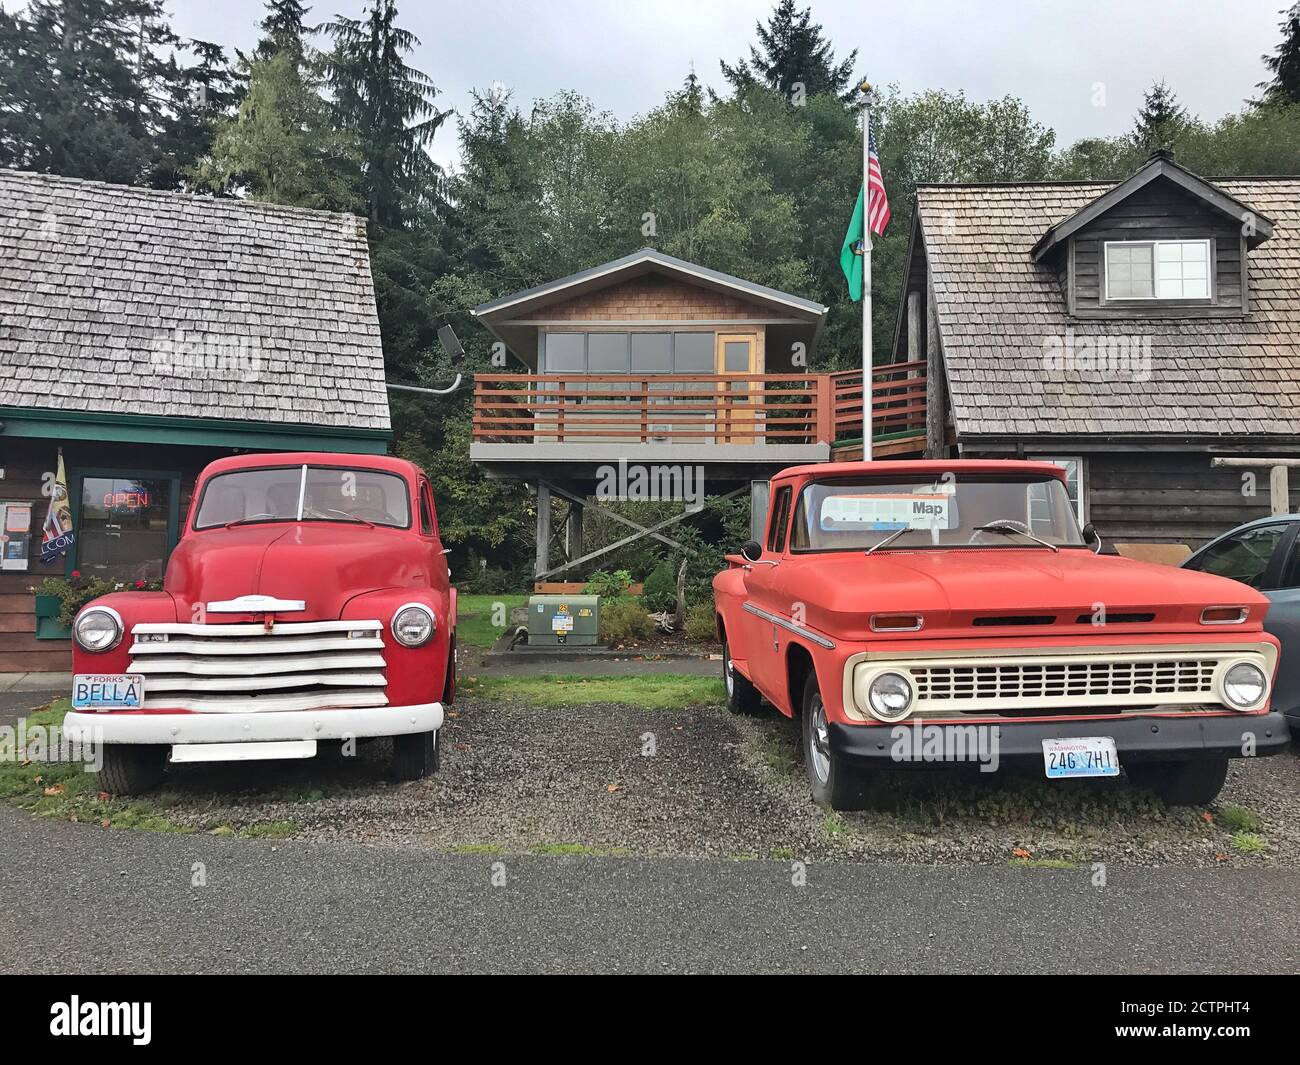 Original cars from the Twilight movie saga in Forks Stock Photo